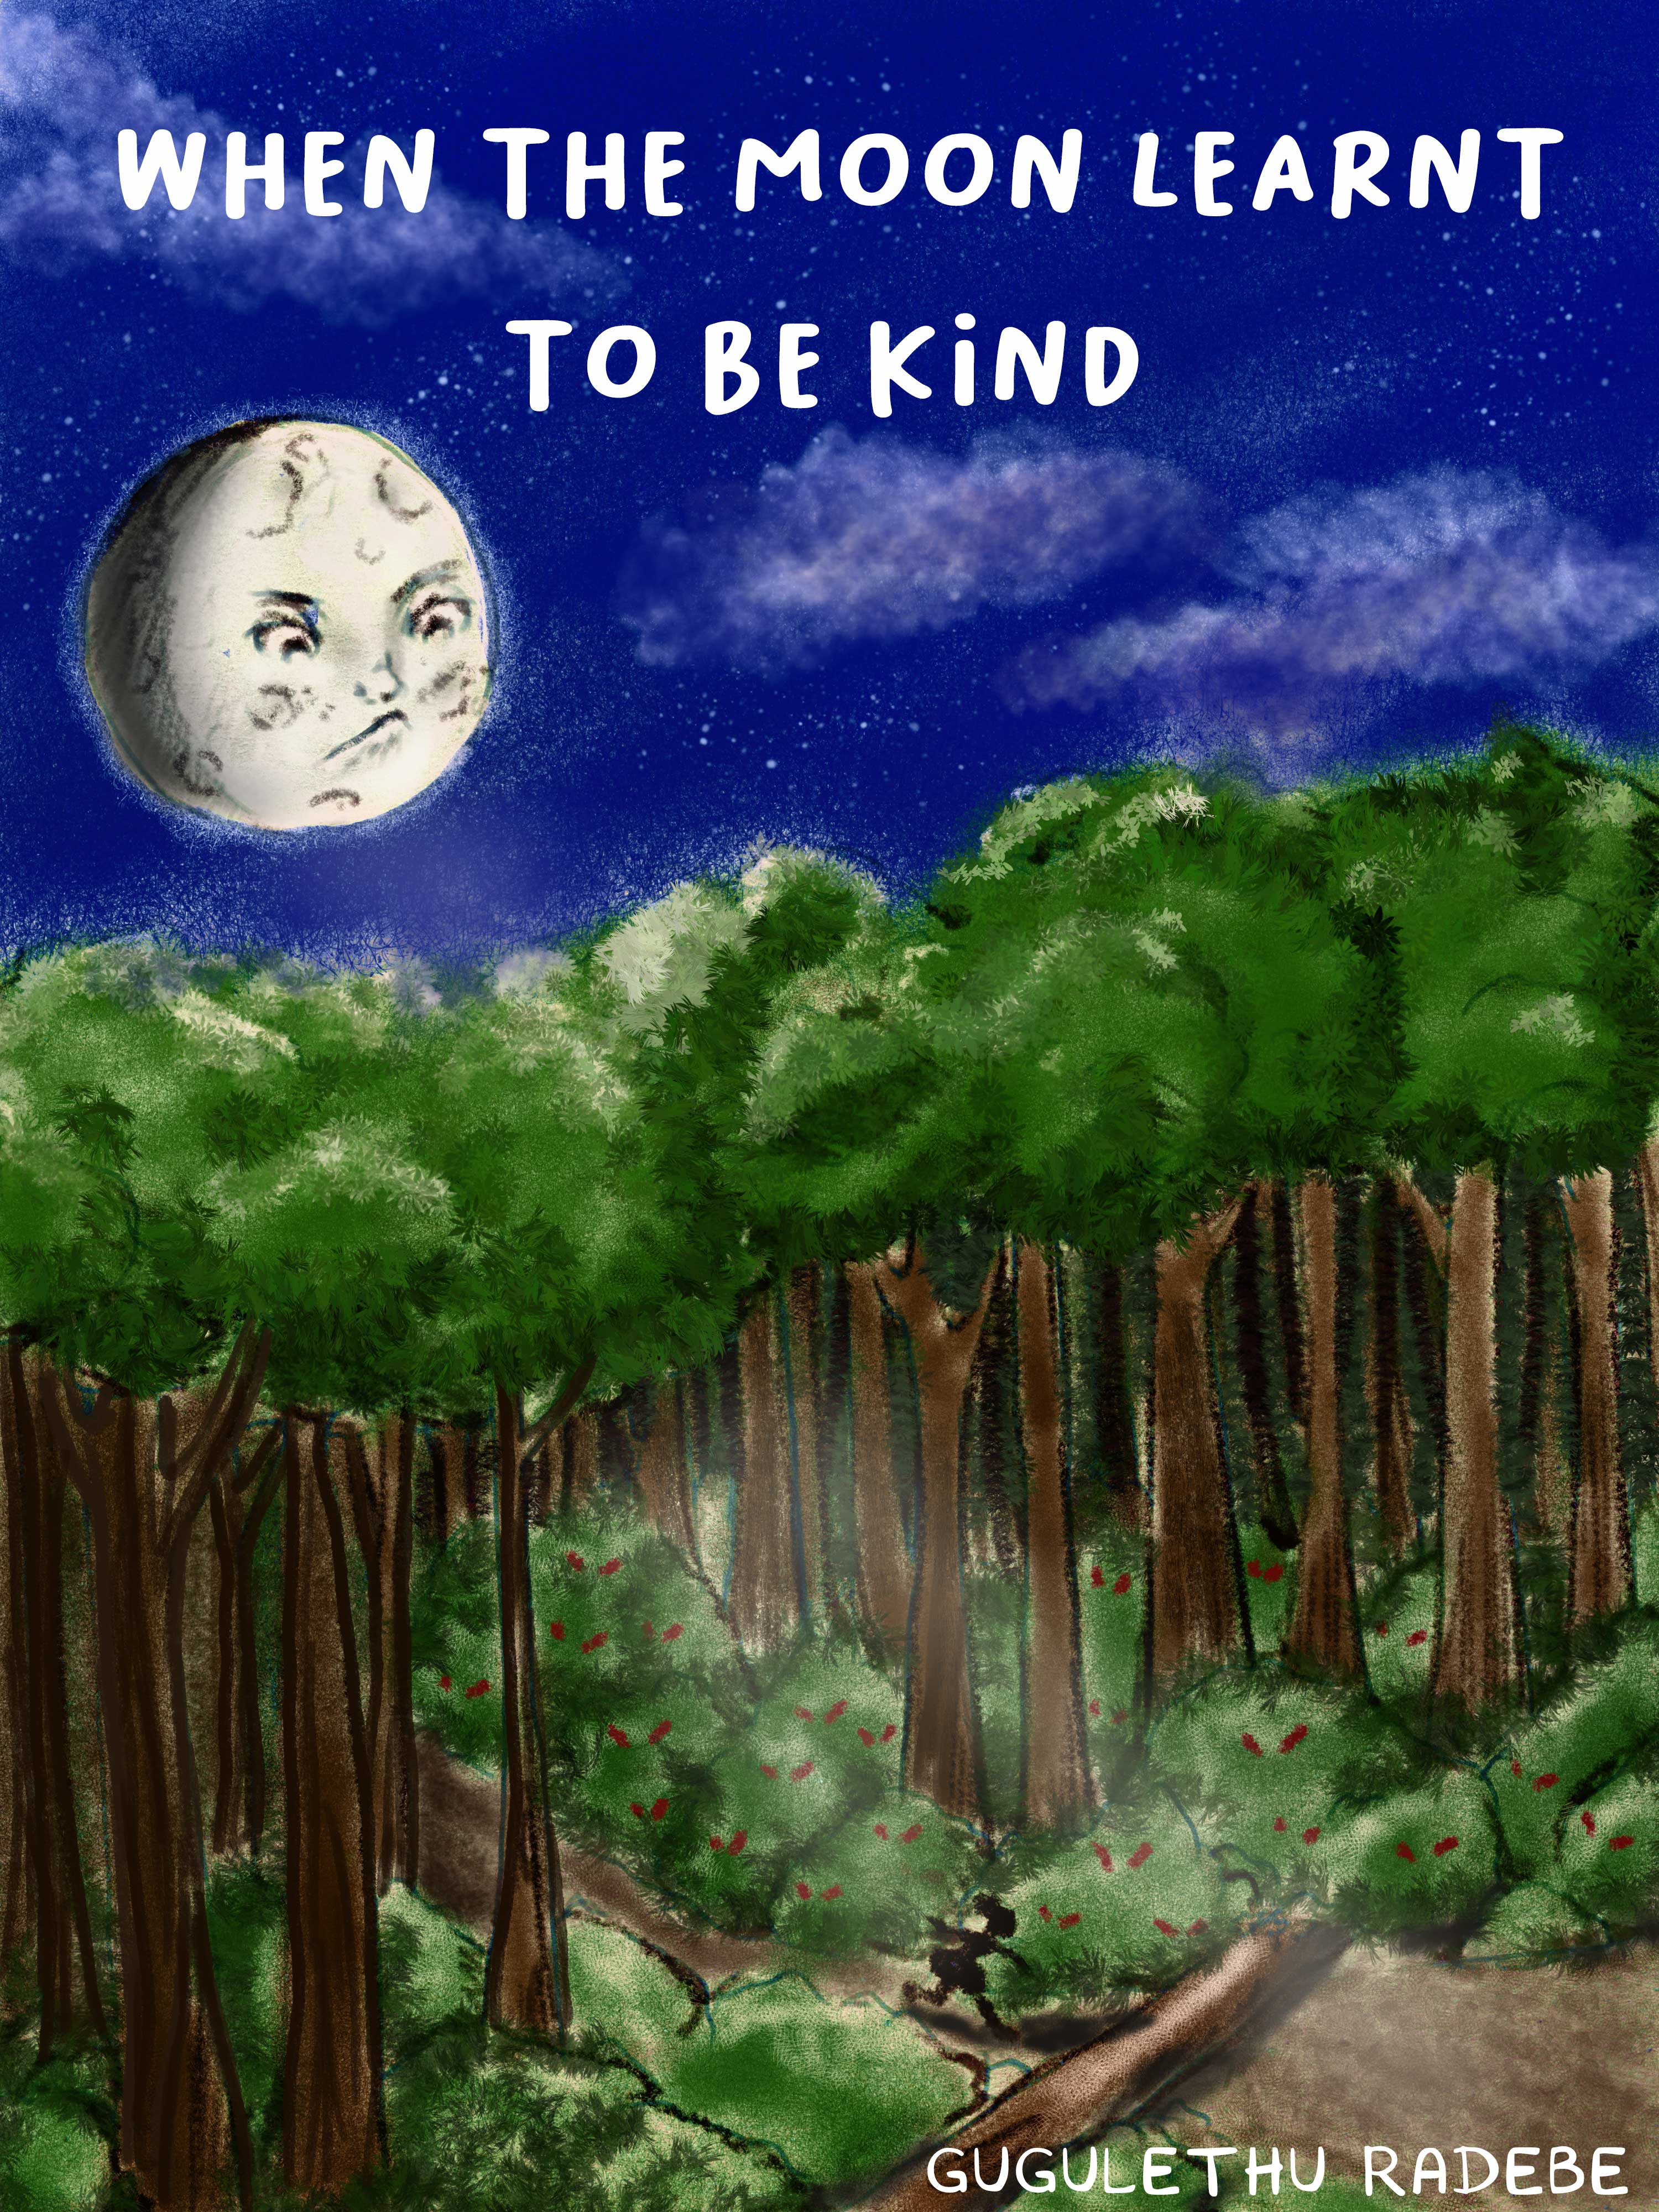 When the moon learnt to be kind